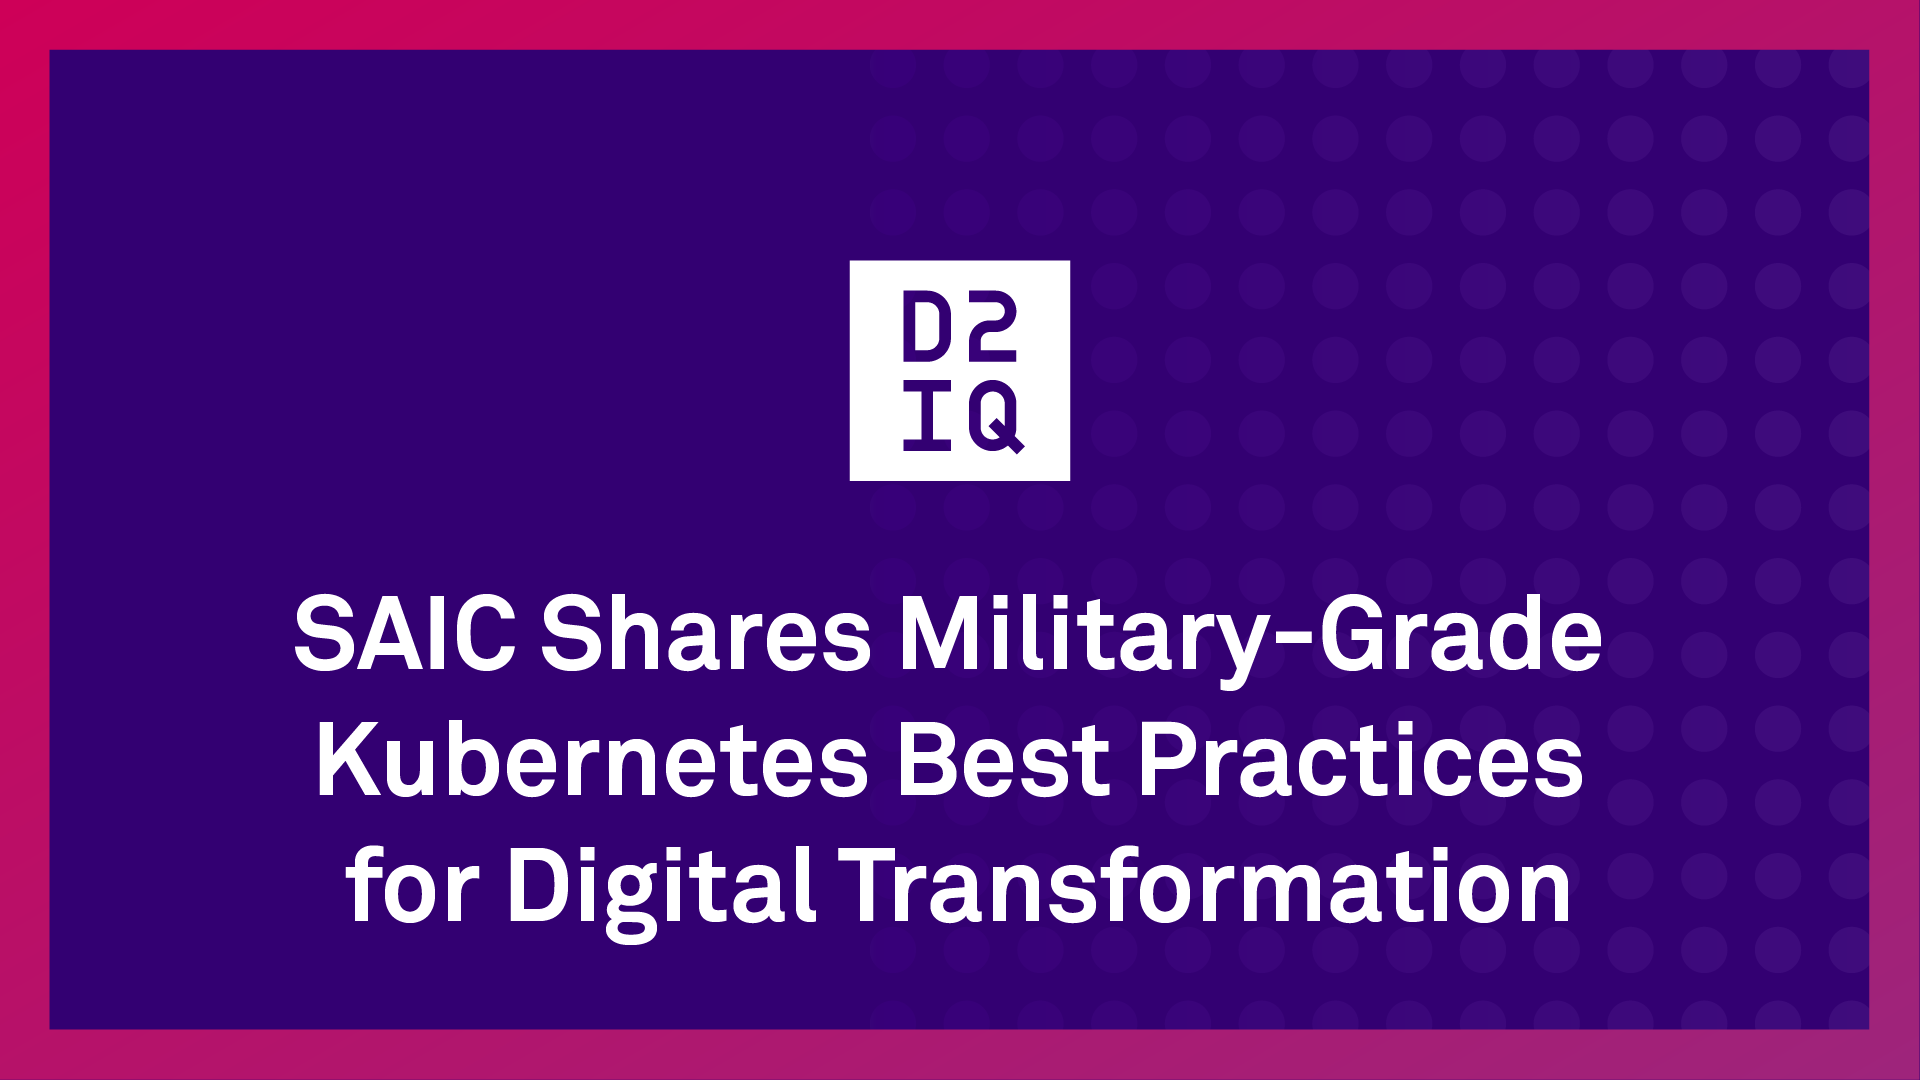 SAIC Shares Military-Grade Kubernetes Best Practices for Digital Transformation